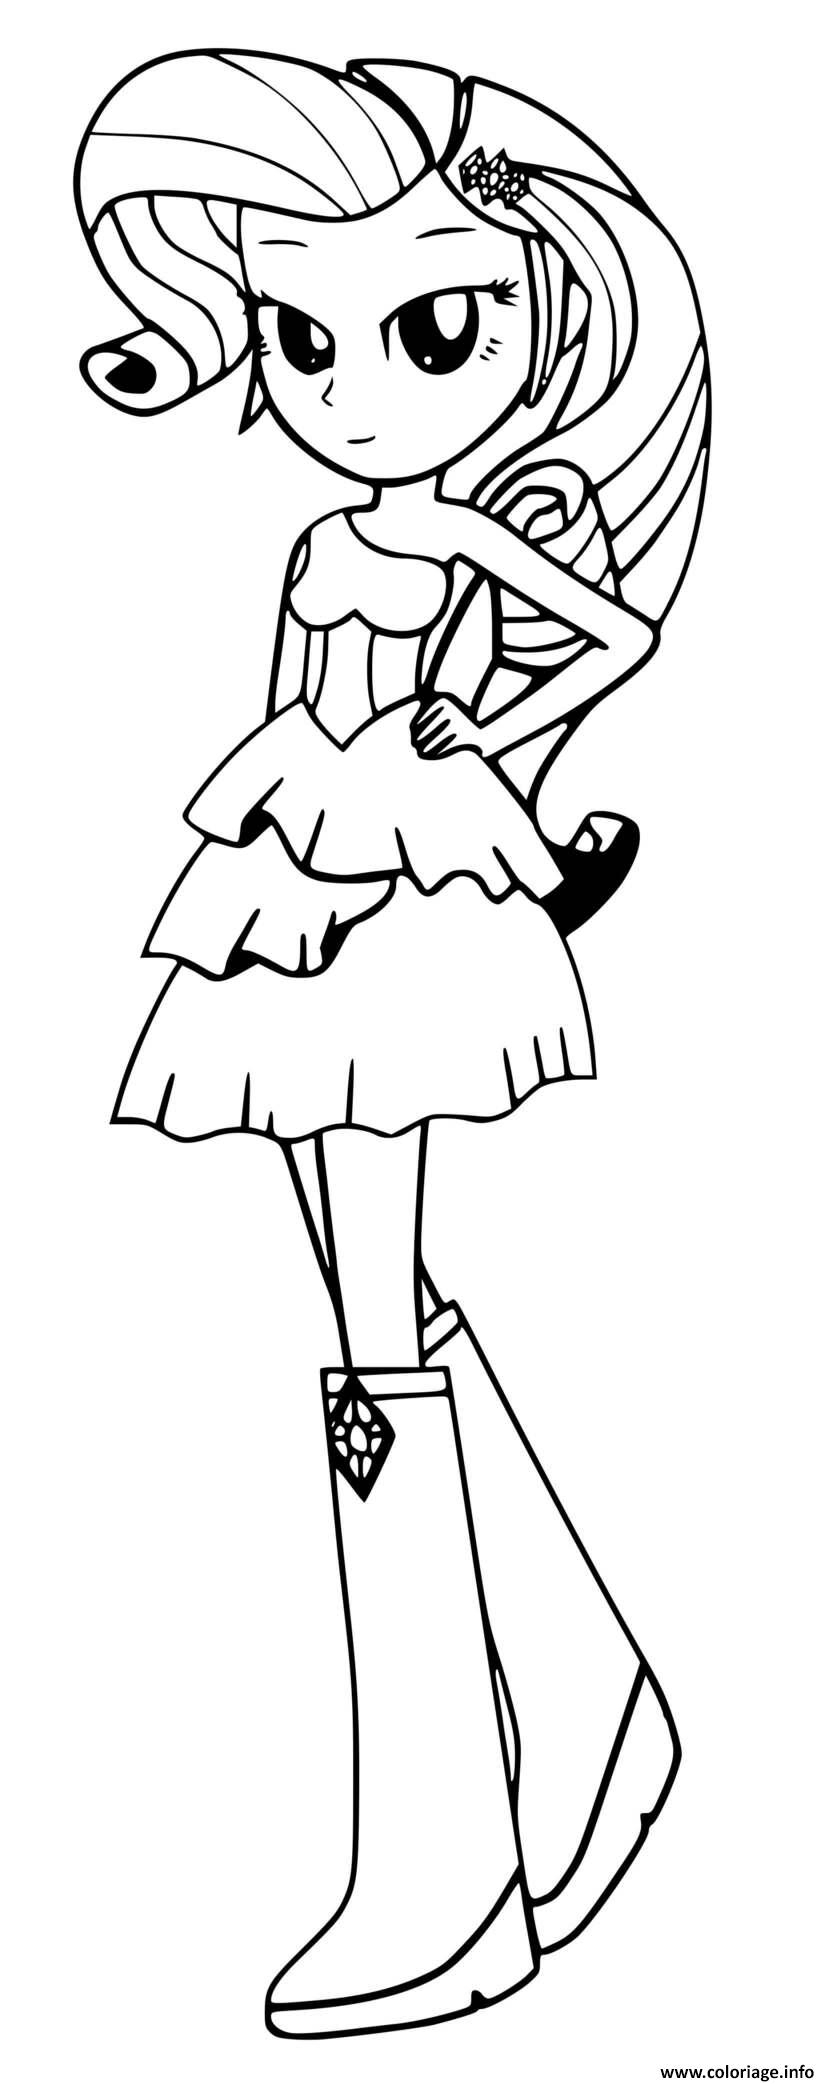 Coloriage My Little Pony Equestria Girls Rarity Dessin Equestria Girls serapportantà Little Pony Coloriage